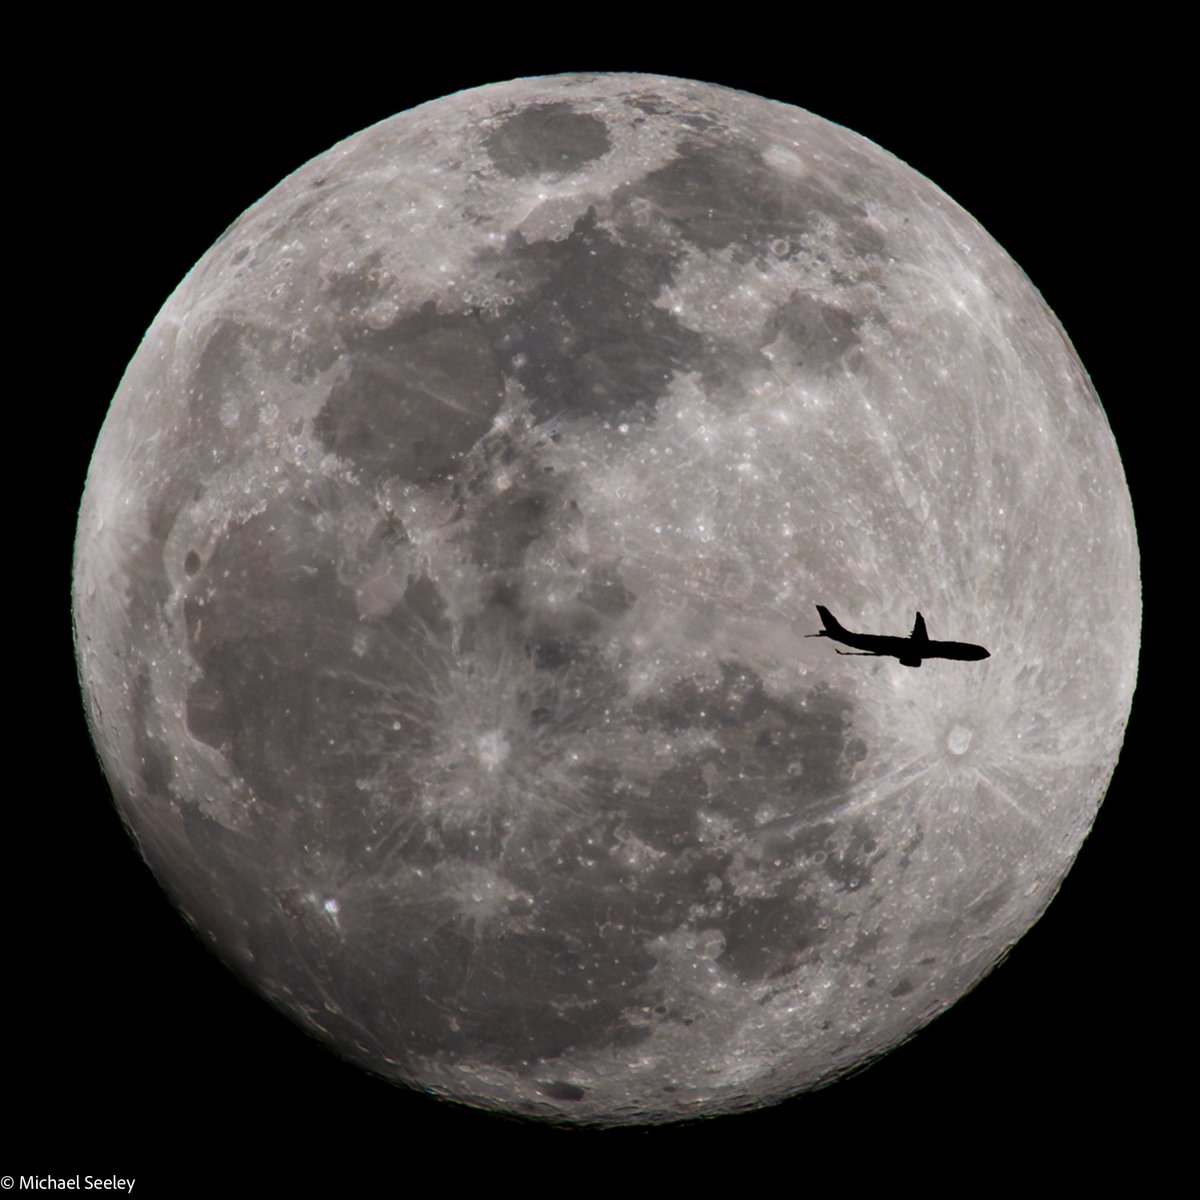 'Passengers on the left side of the plane will have a great view of Tycho' (this pilot, maybe) An Airbus A330-343 (reg C-GHLM) passes in front of the 99% illuminated Moon Monday night, seen from the Space Coast (FL). Air Canada flight 1026 was traveling from Toronto (YYZ) to